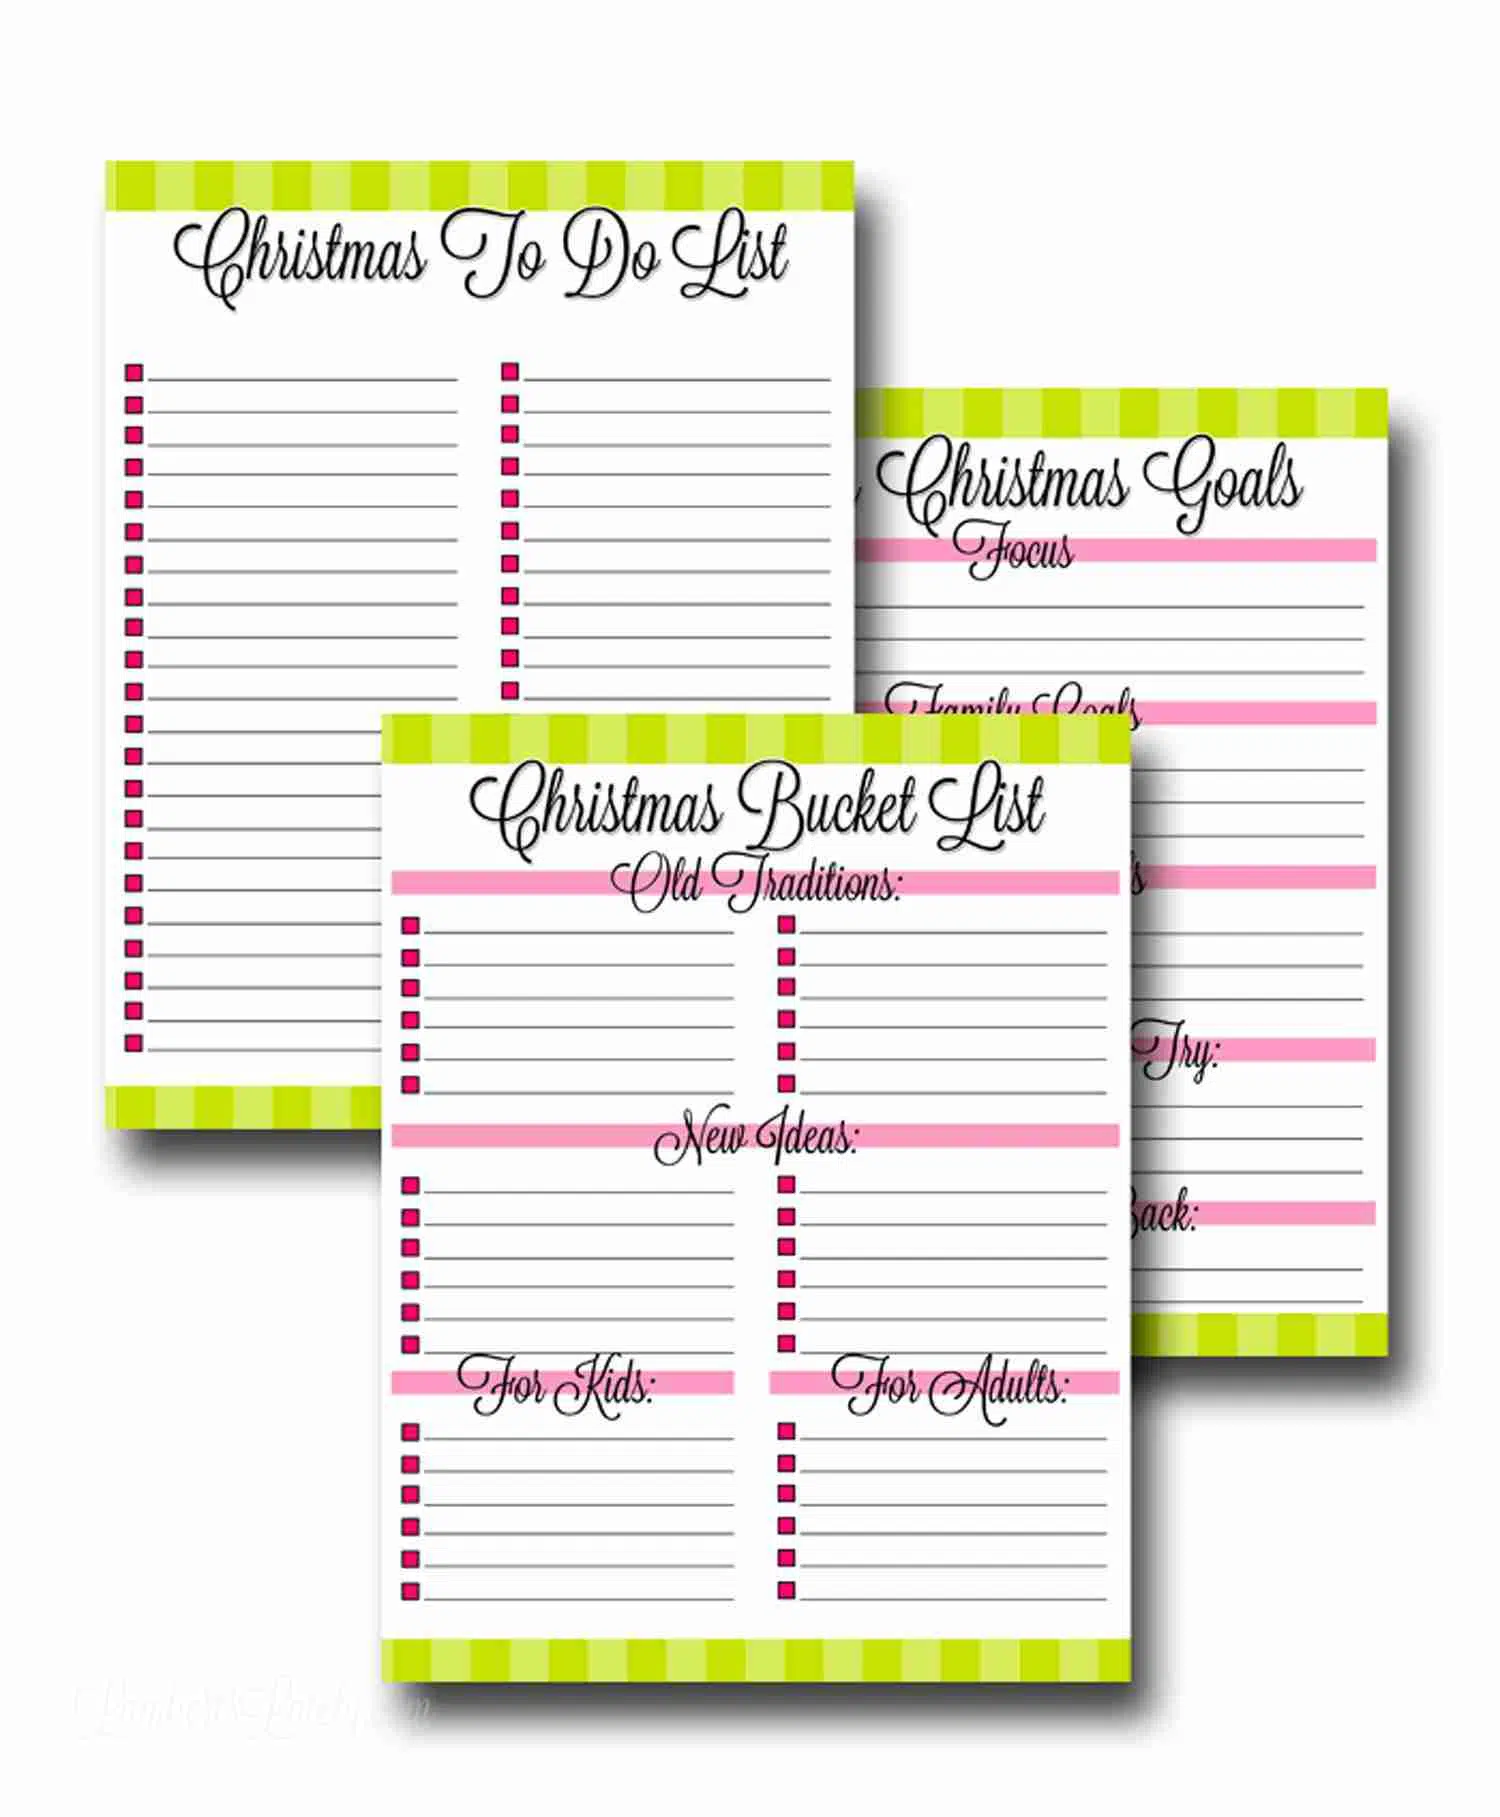 Christmas planner - overall planning